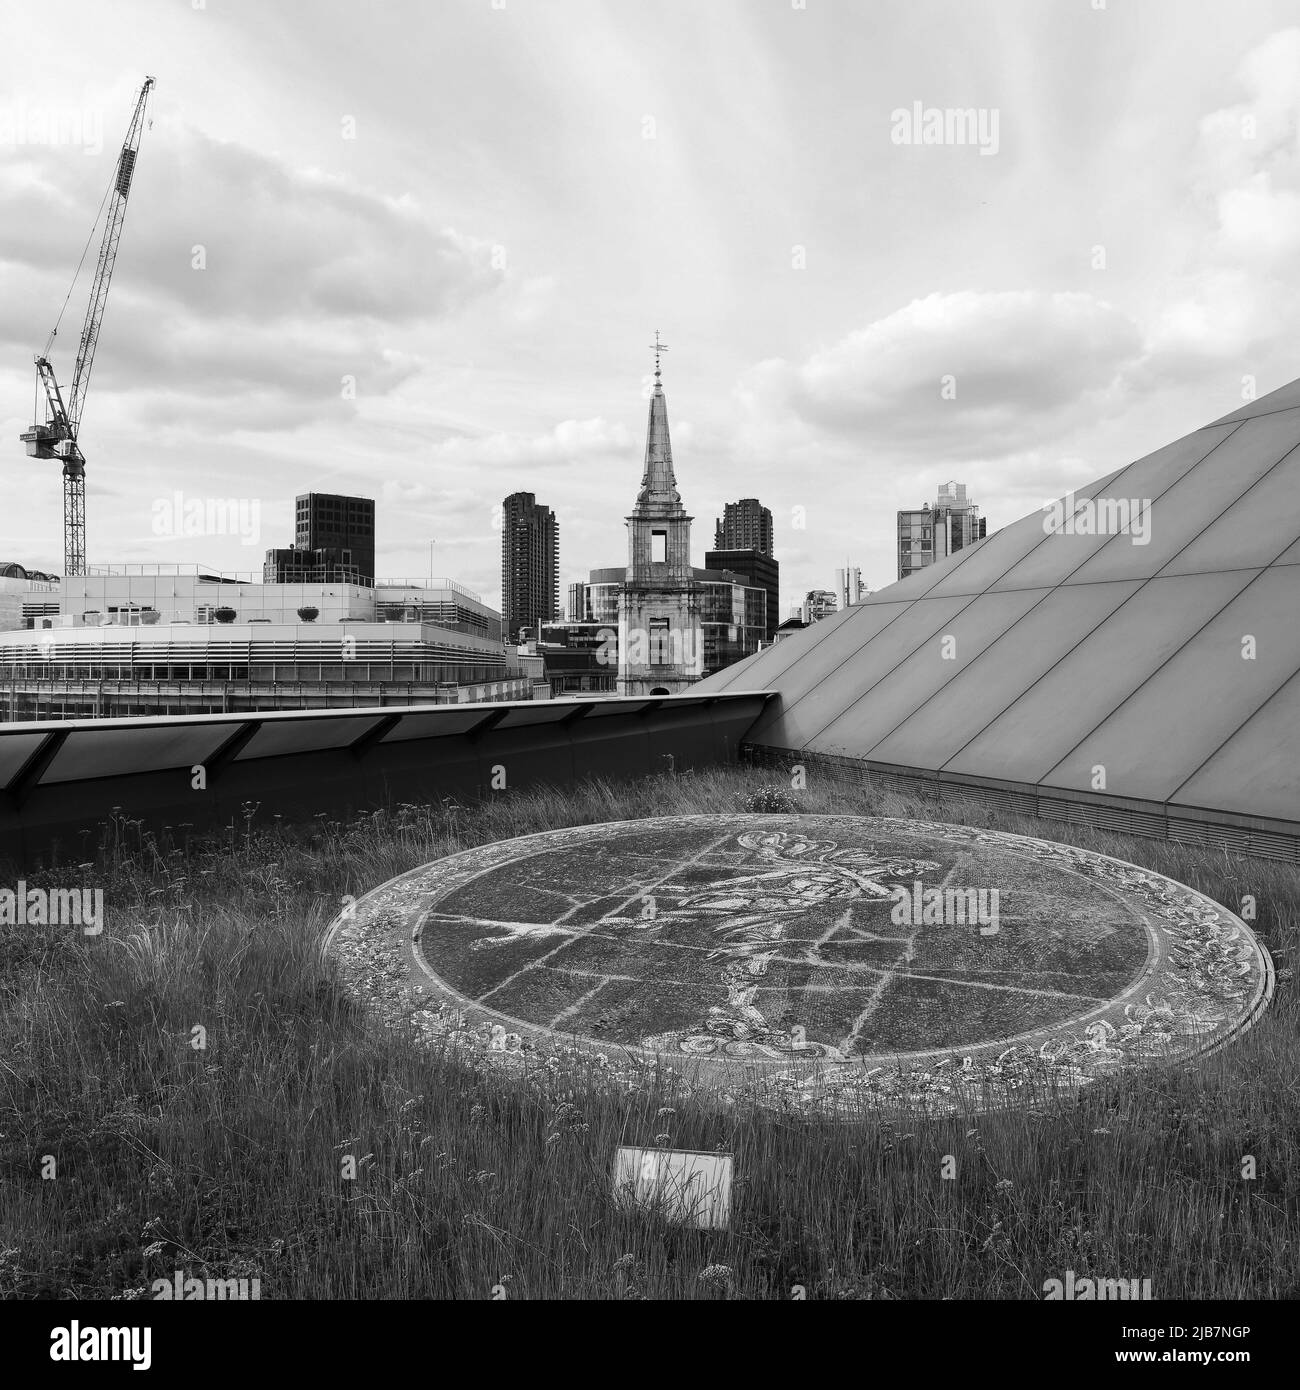 London, Greater London, England, May 21 2022: View from One New Change toward a church tower. Artwork in the foreground. Stock Photo